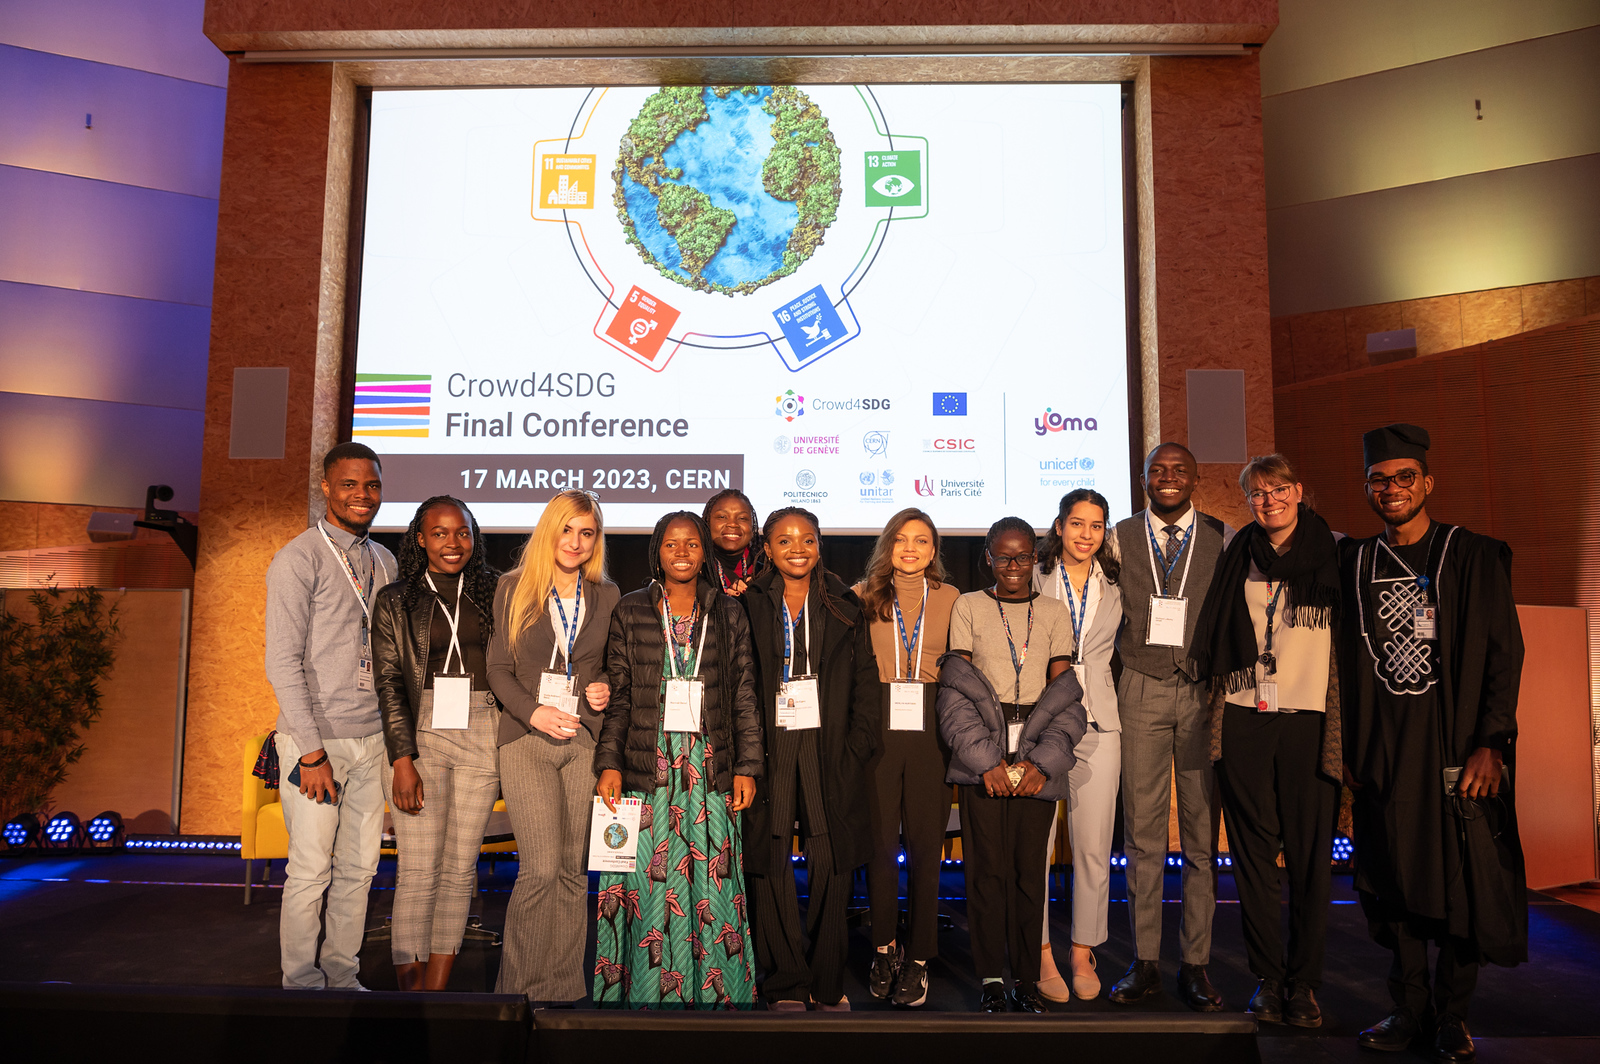 Finalists of the Crowd4SDG Conference